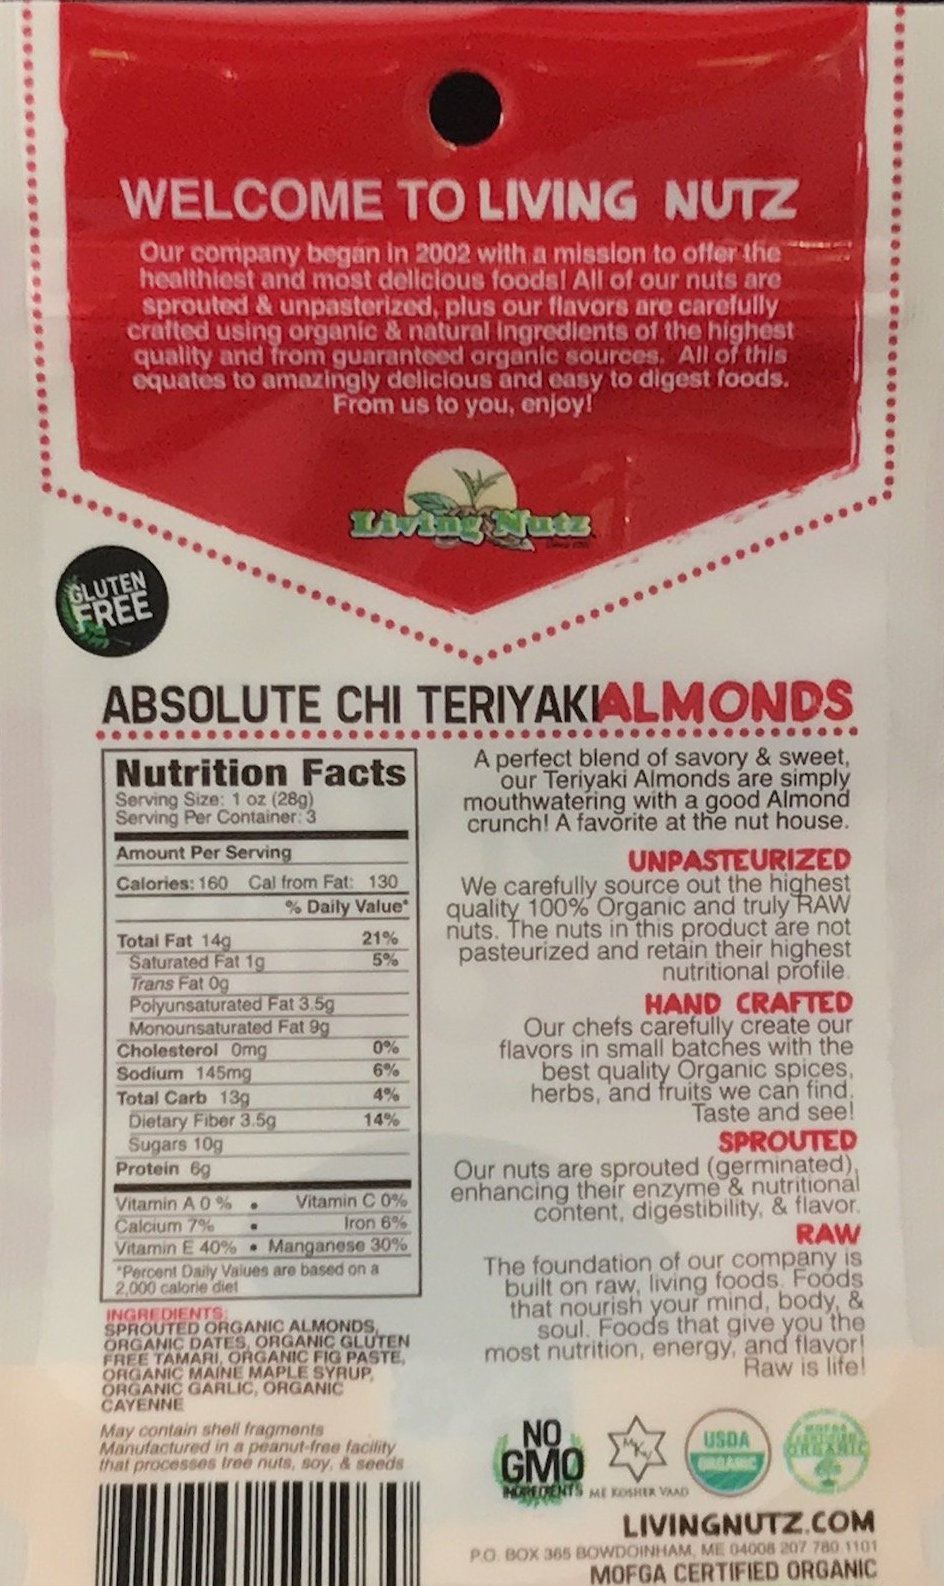 Teriyaki sprouted almonds. Unpasteurized almonds, organic almonds, sprouted nuts